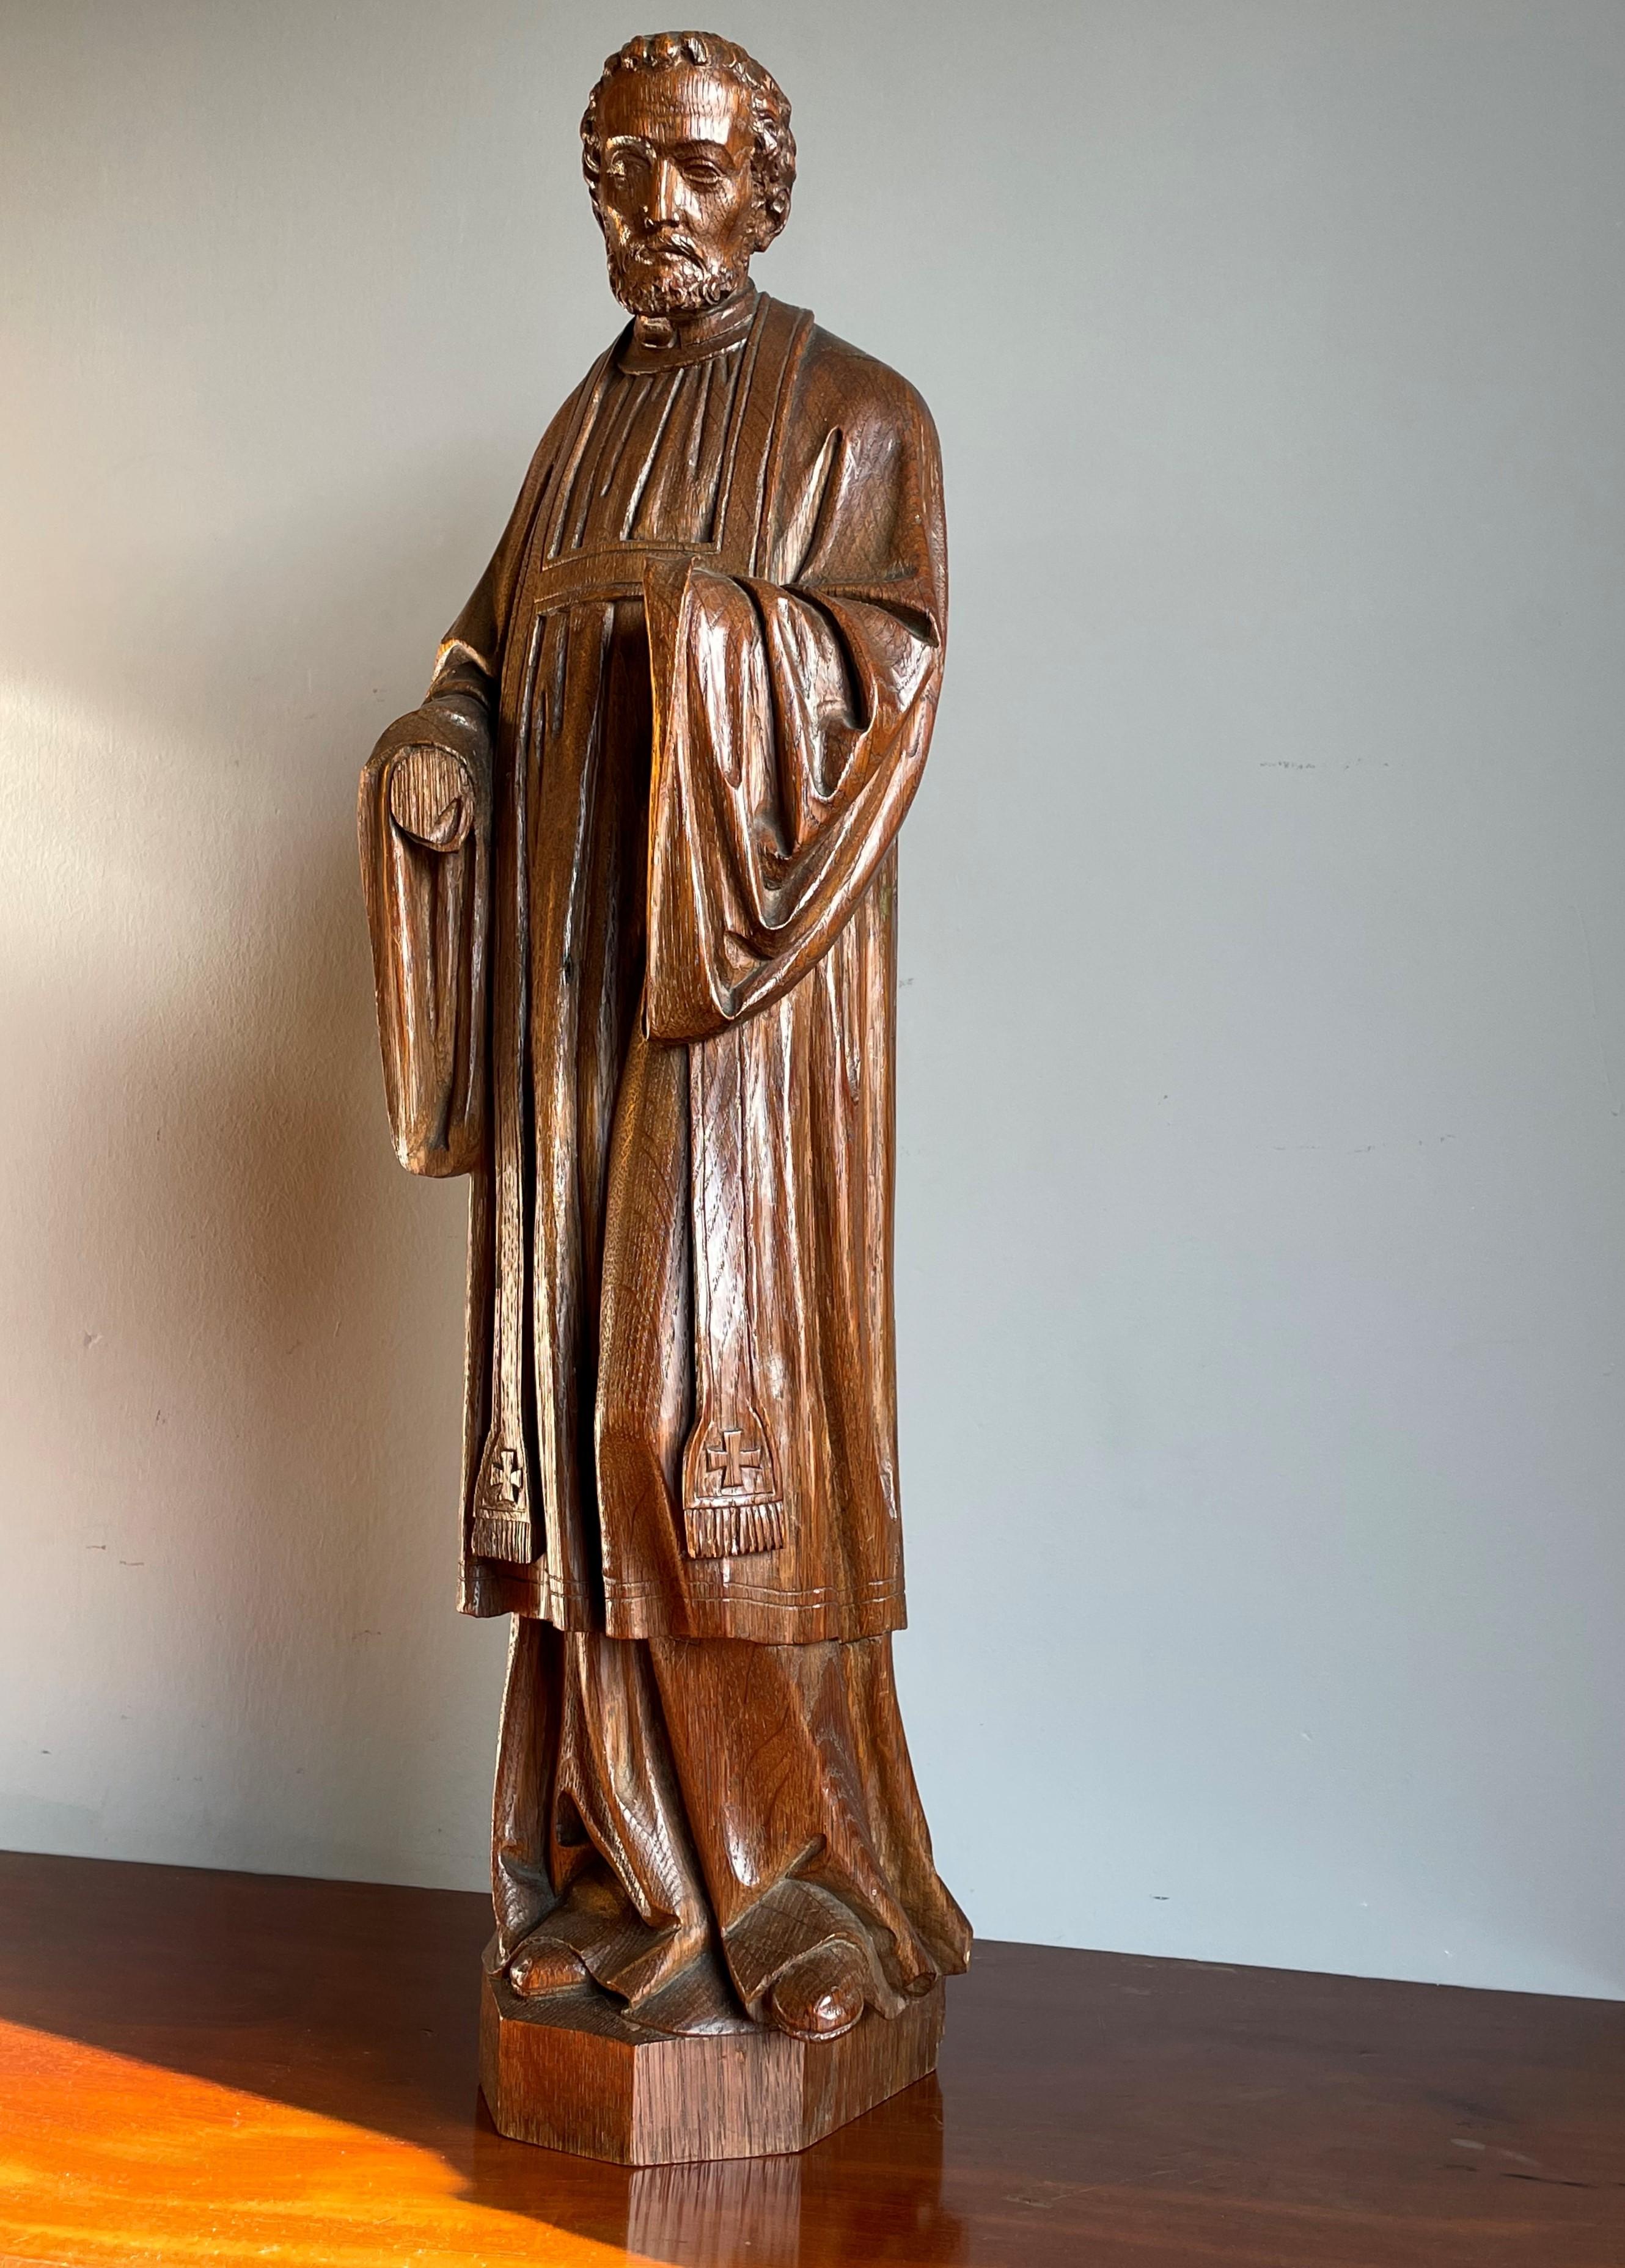 Late 1800s, hand-carved oak sculpture of a Saint or clergyman.

Sometimes we find antique sculptures / works of religious art of such good quality that we simply need to purchase it, even if we don't know who they are. There are many people in the